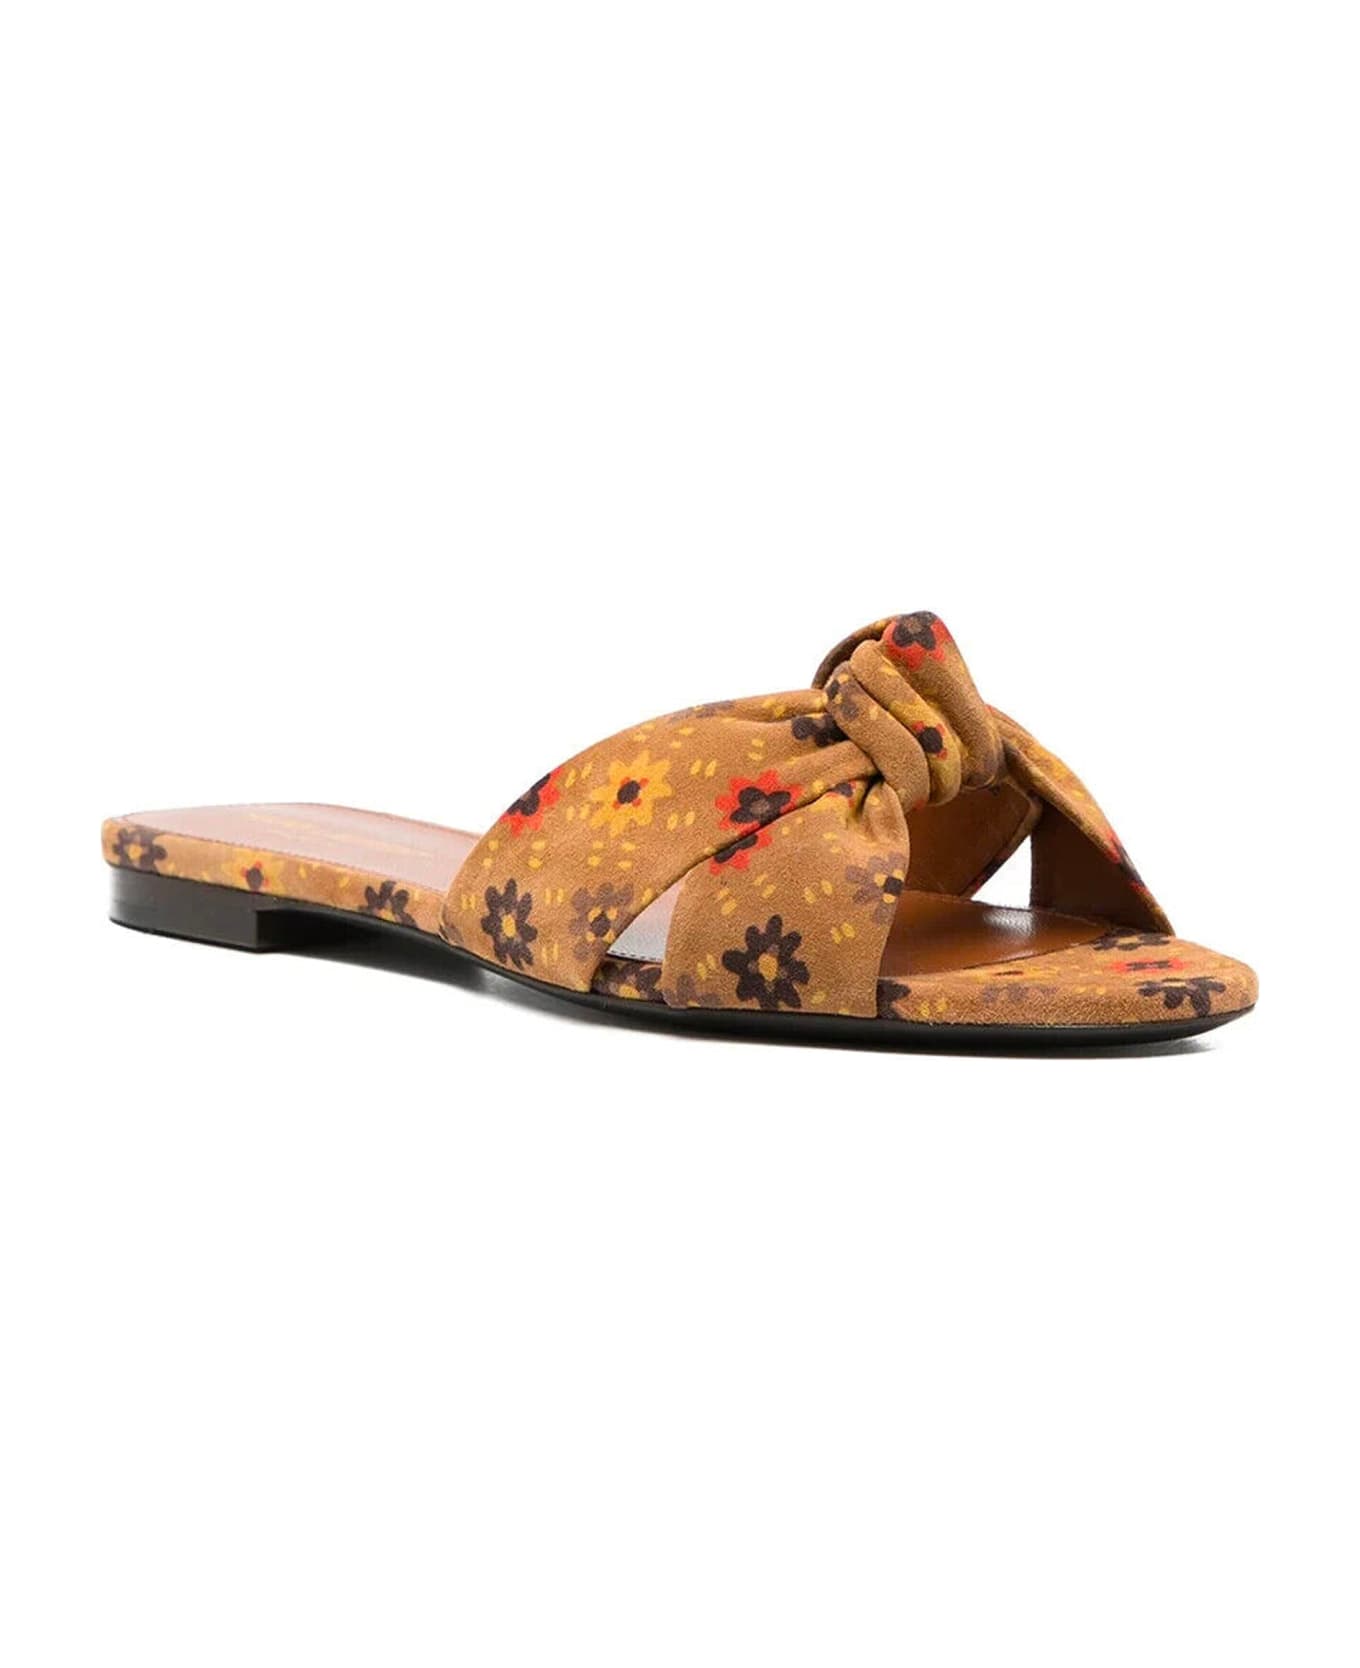 Saint Laurent Bianca Knotted Suede Slides - Brown サンダル